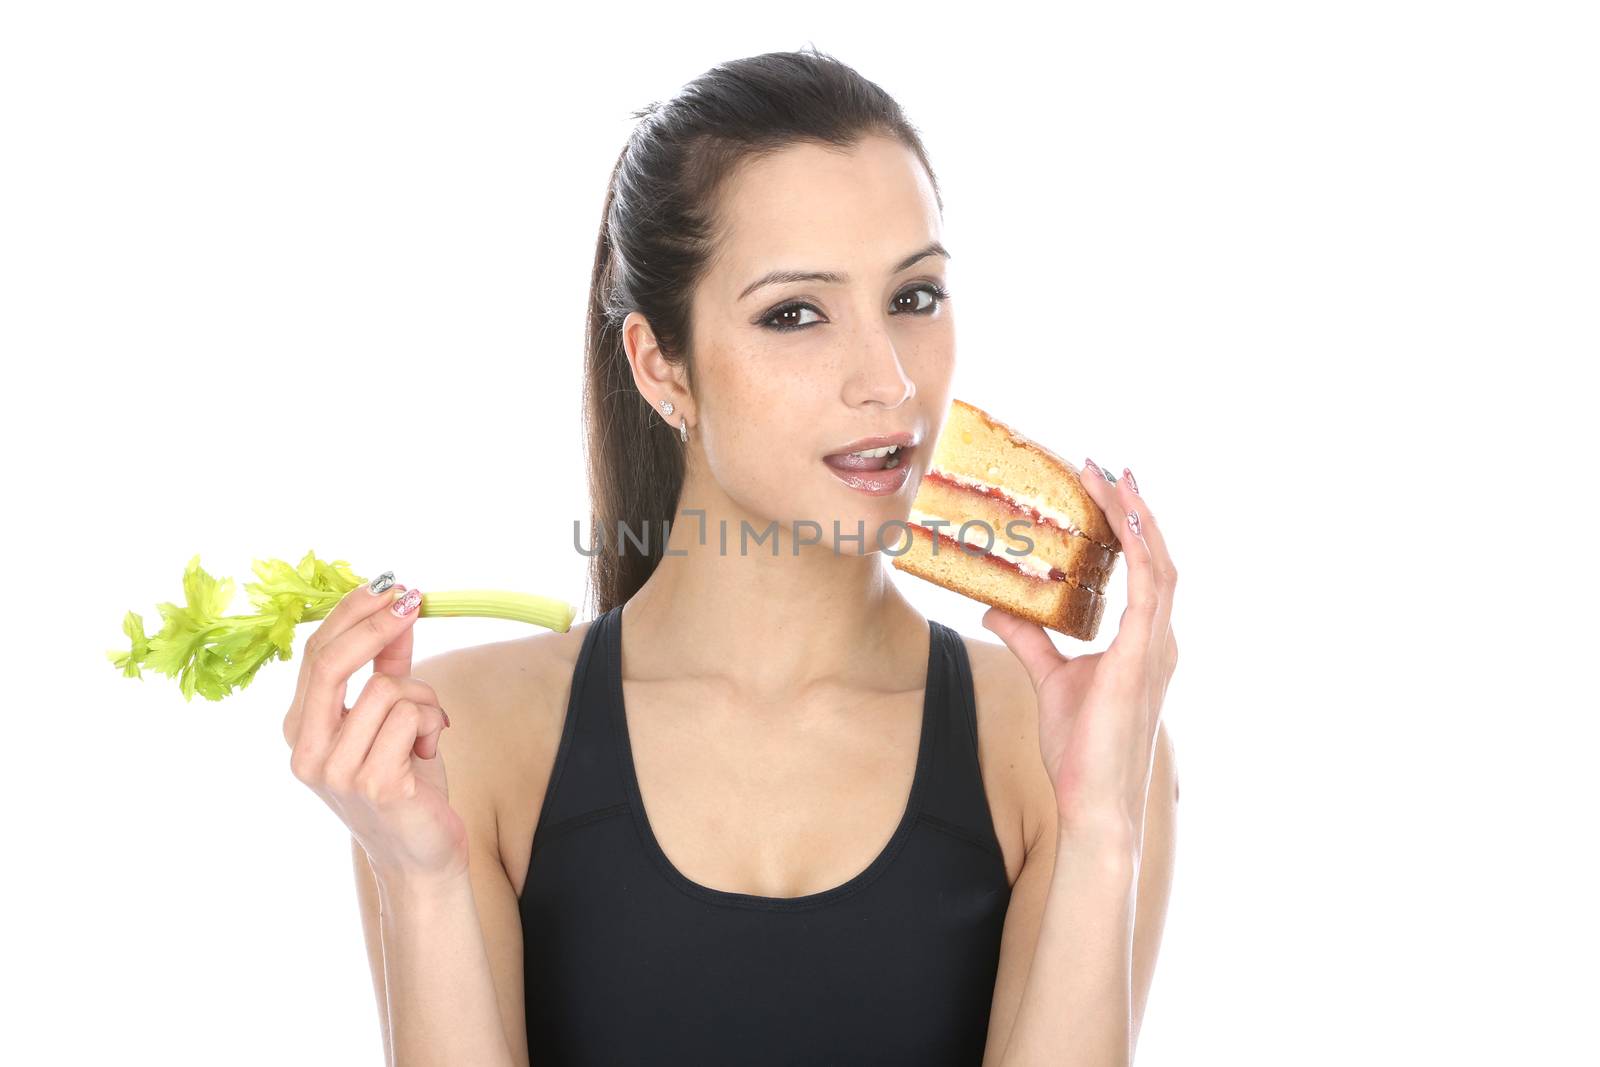 Model Released. Woman Holding Cake and Celery